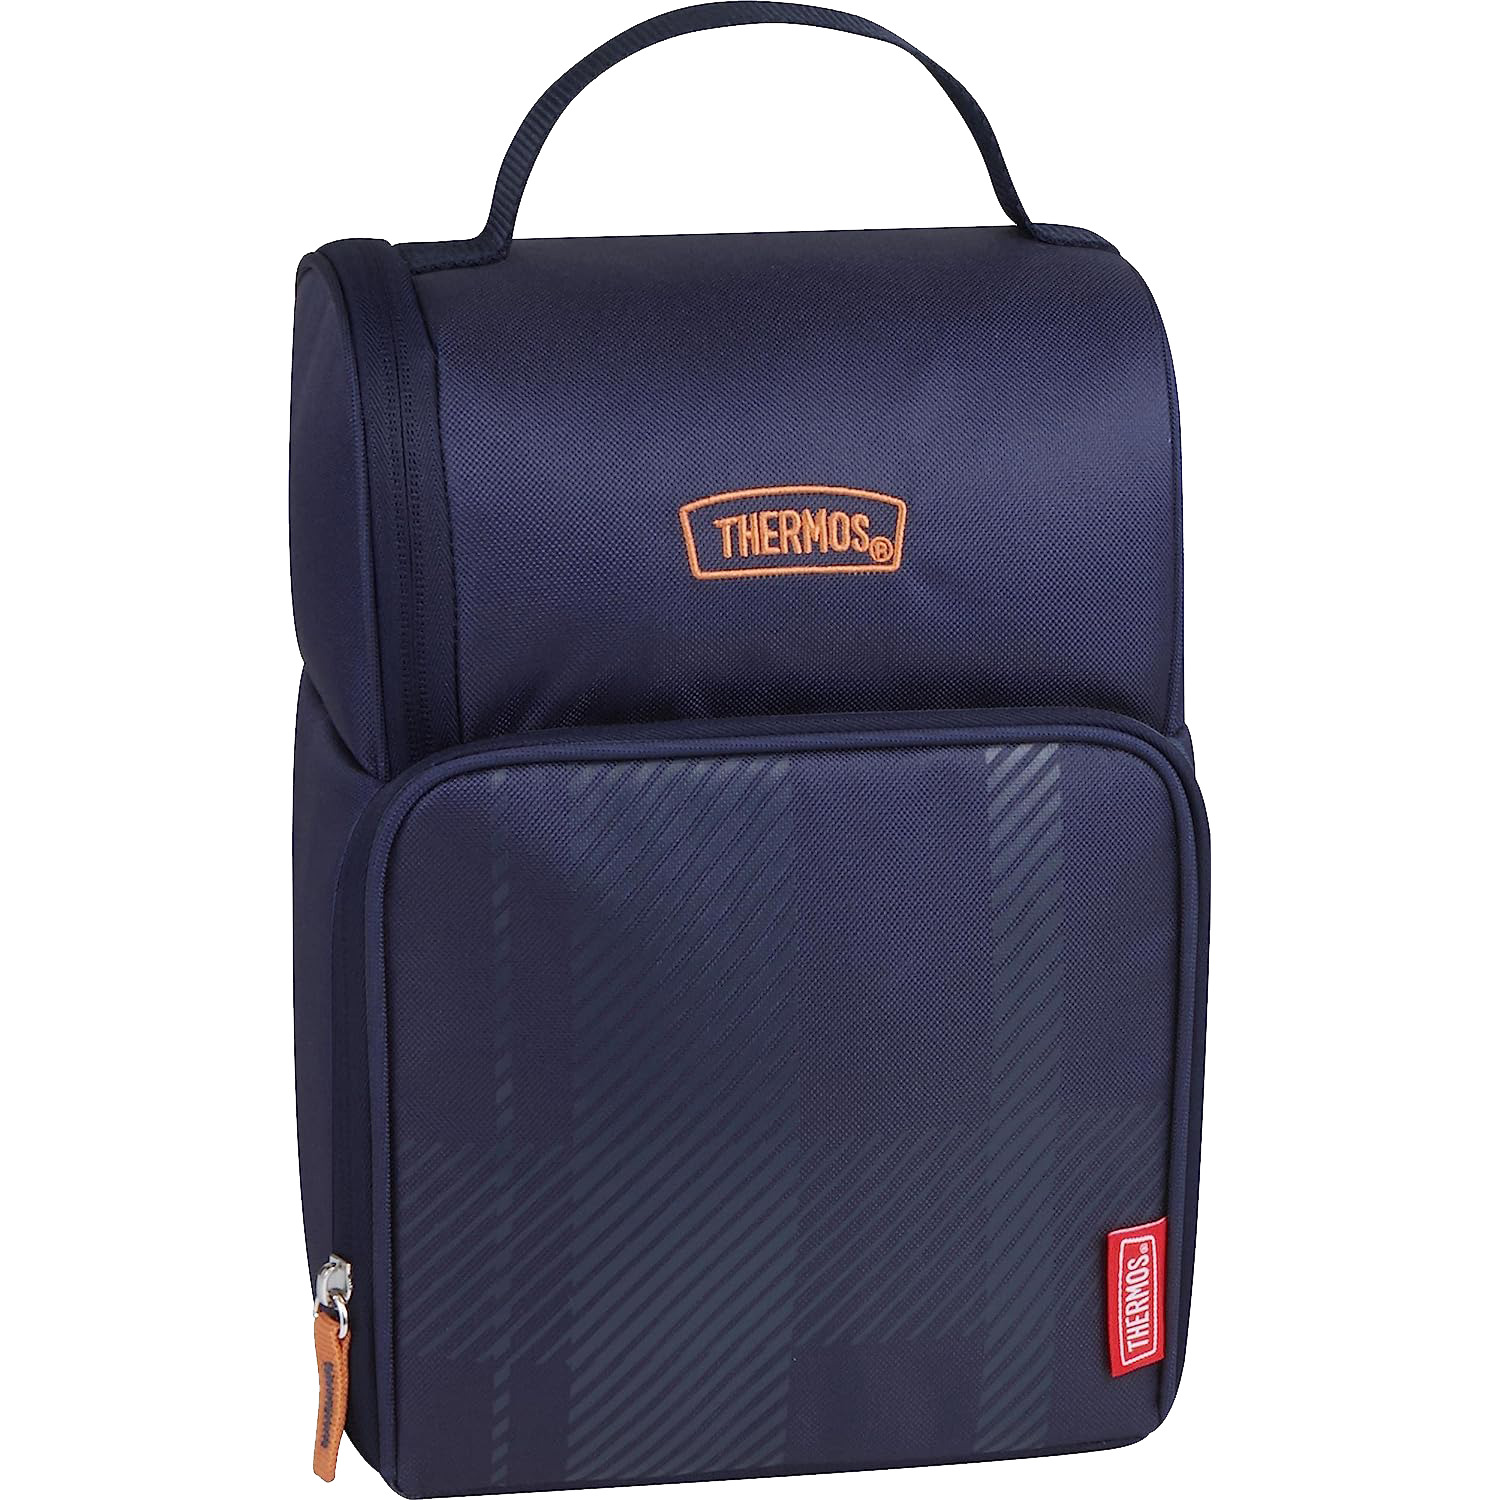 https://www.rossy.ca/media/A2W/products/thermos-dual-compartment-lunch-box-navy-plaid-83201-3.jpg